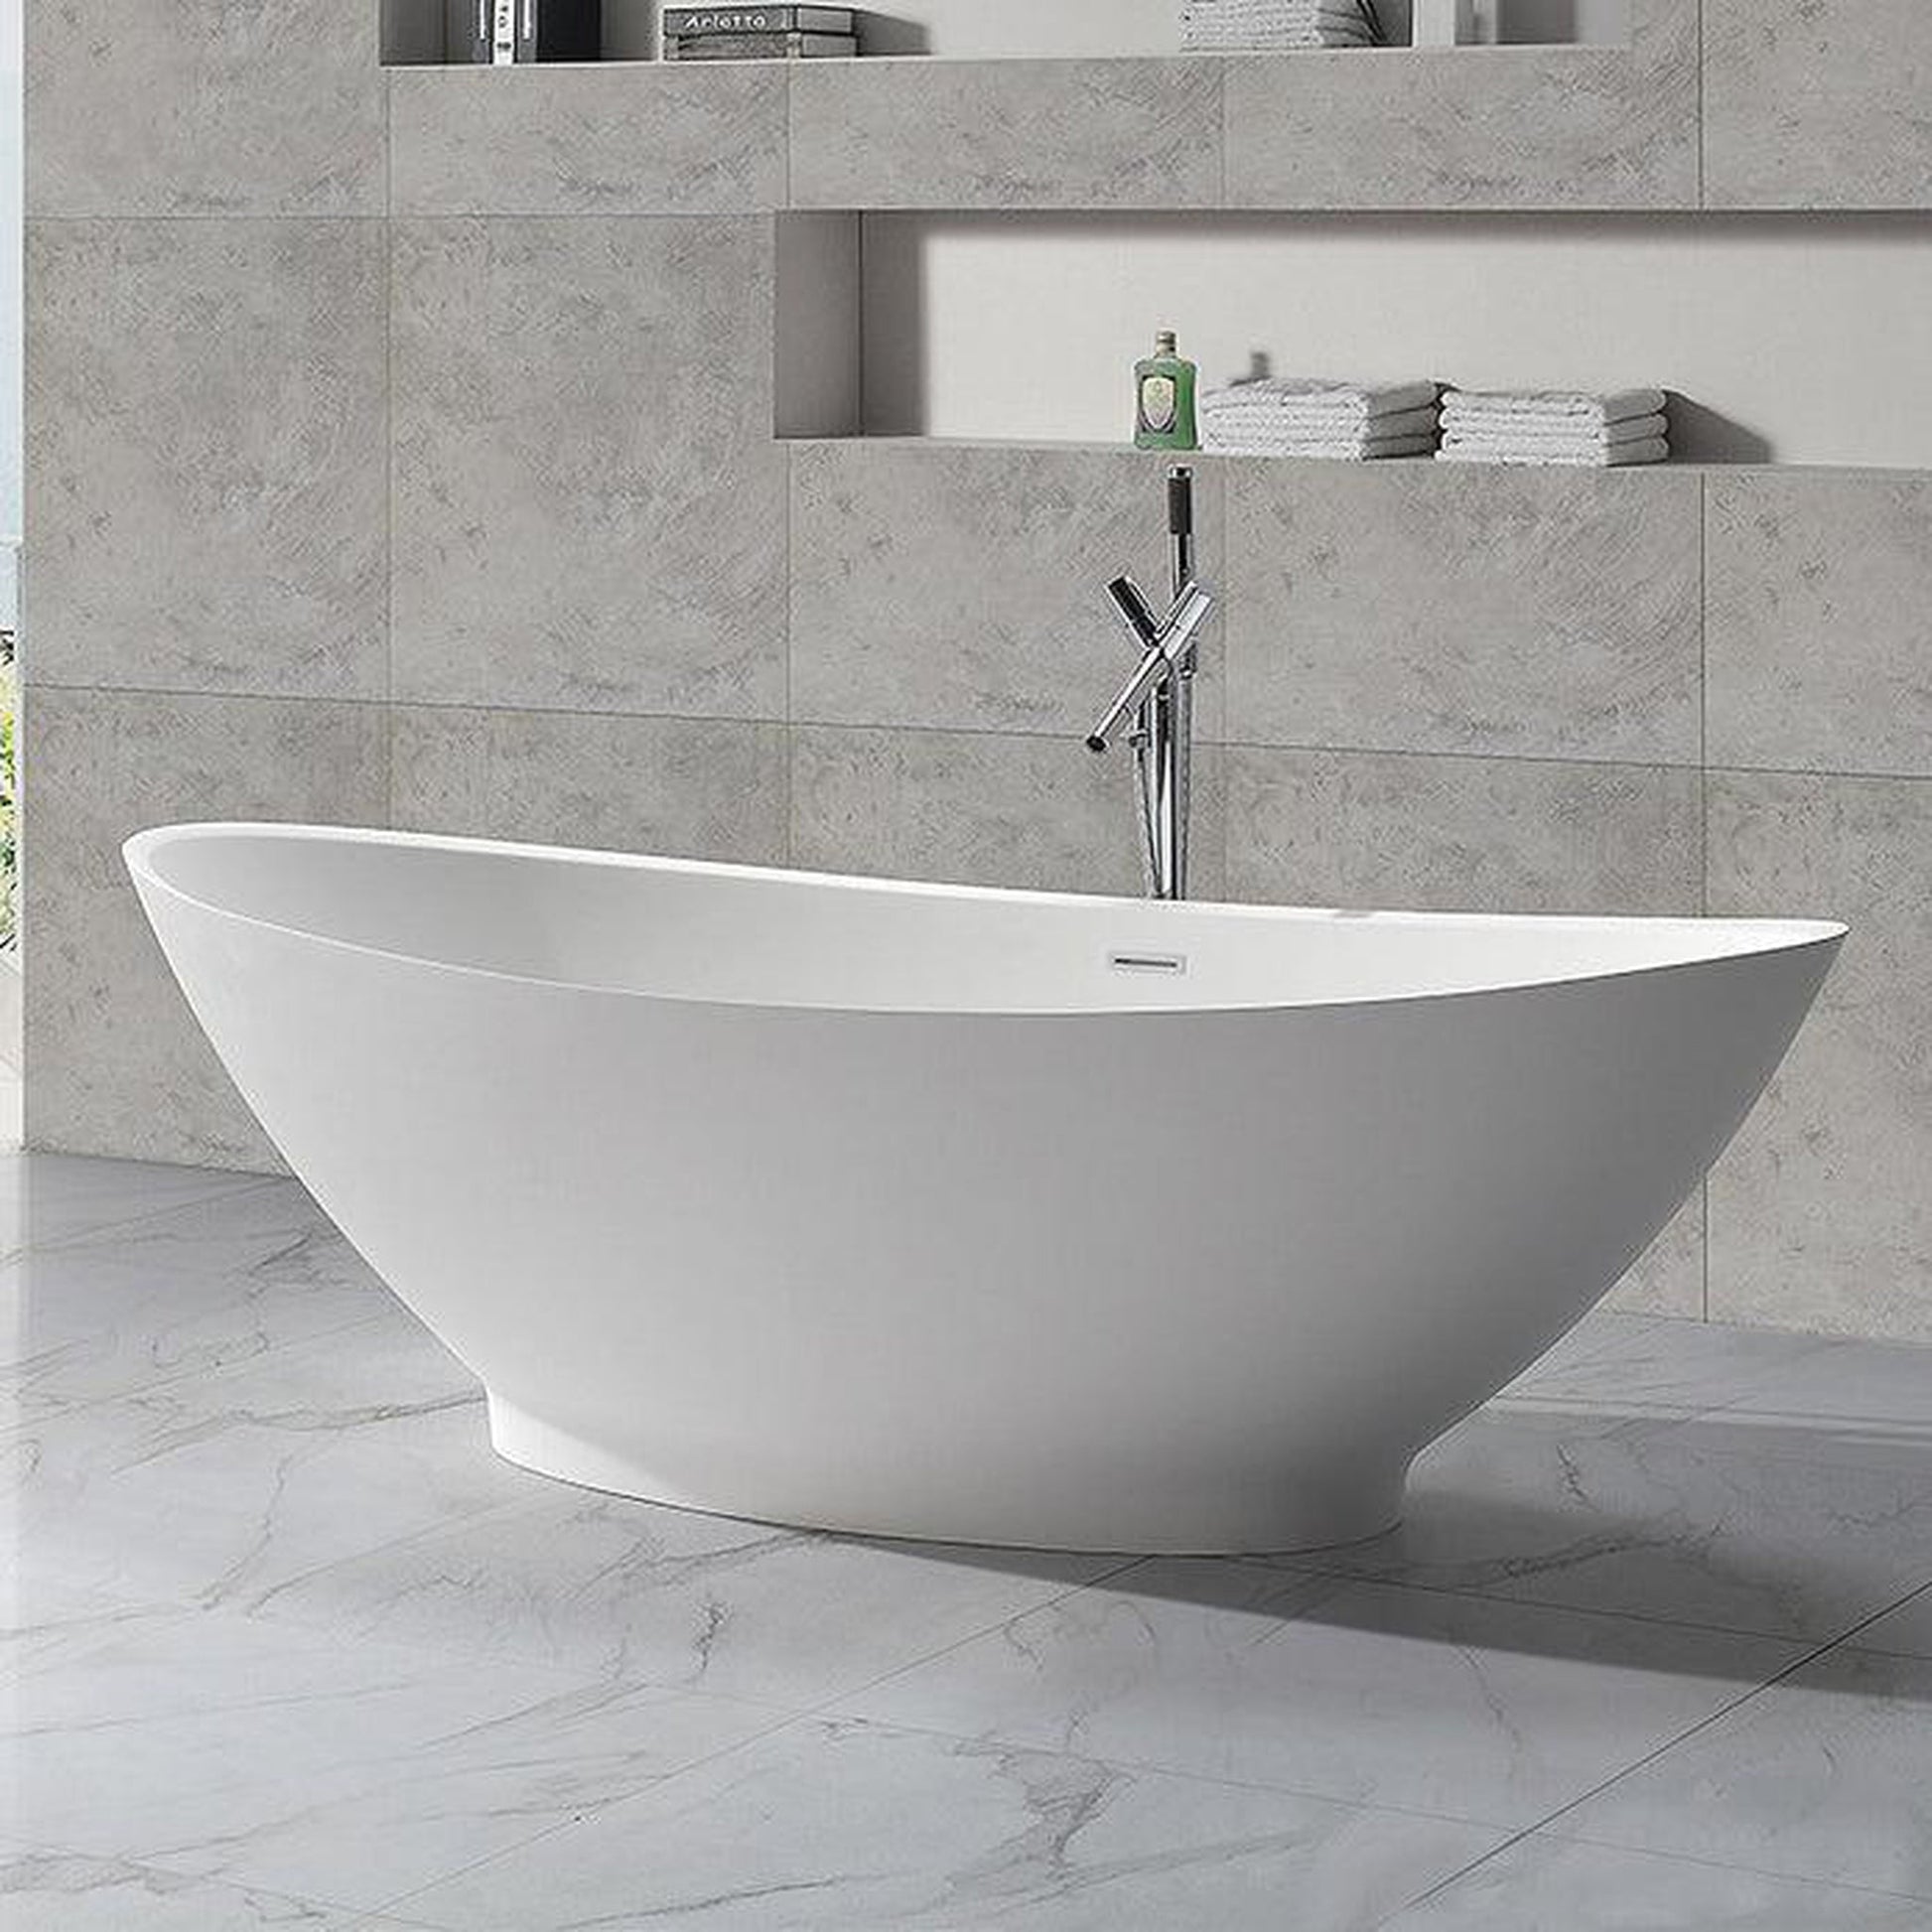 Vanity Art 69" W x 28" H White Acrylic Freestanding Bathtub With Polished Chrome Pop-up Drain Slotted Overflow and Flexible Drain Hose